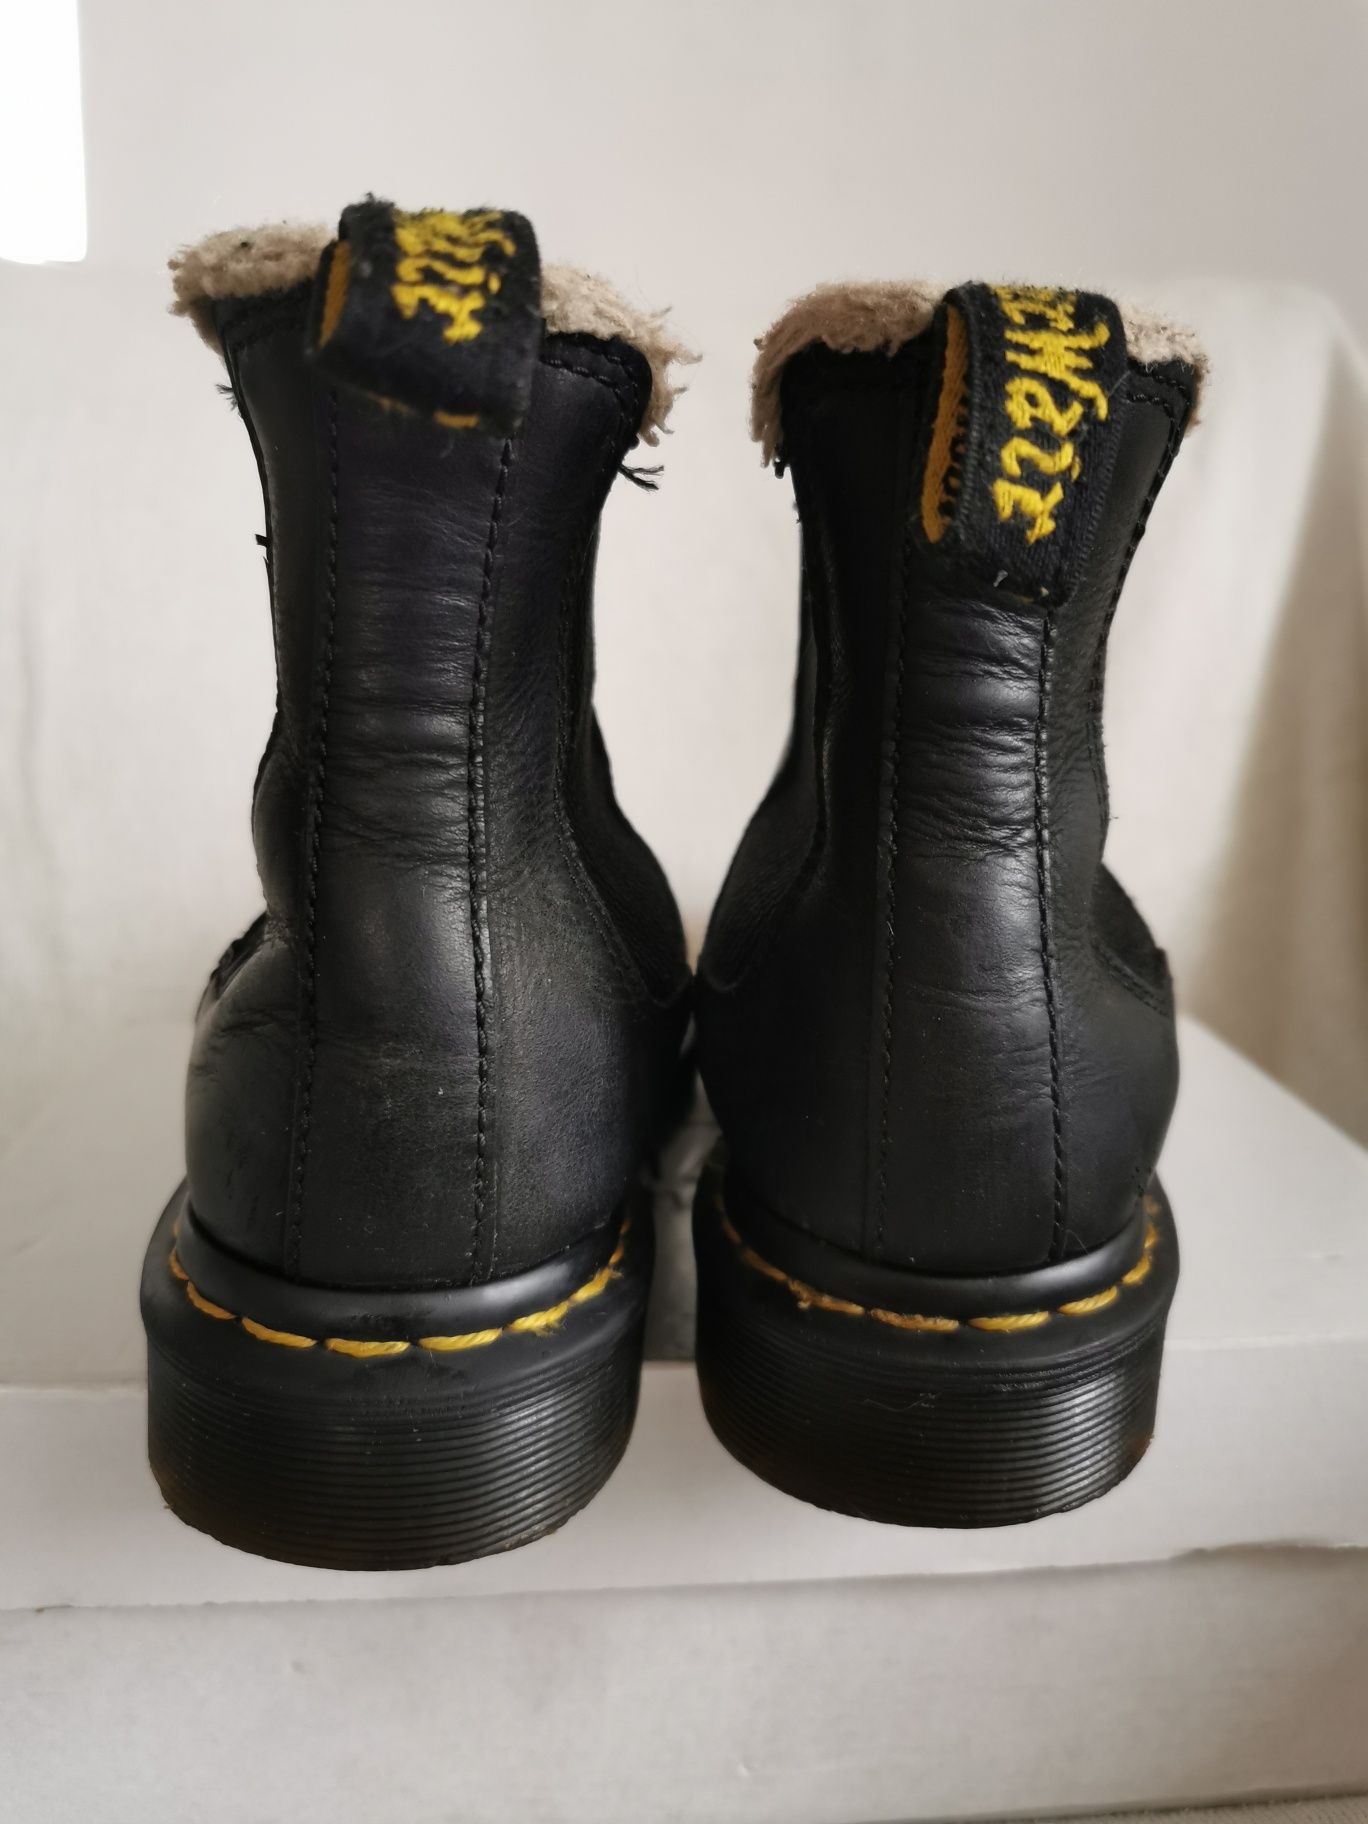 Dr. Martens Air Wair Leonore Chelsea ocieplane sztyblety 37